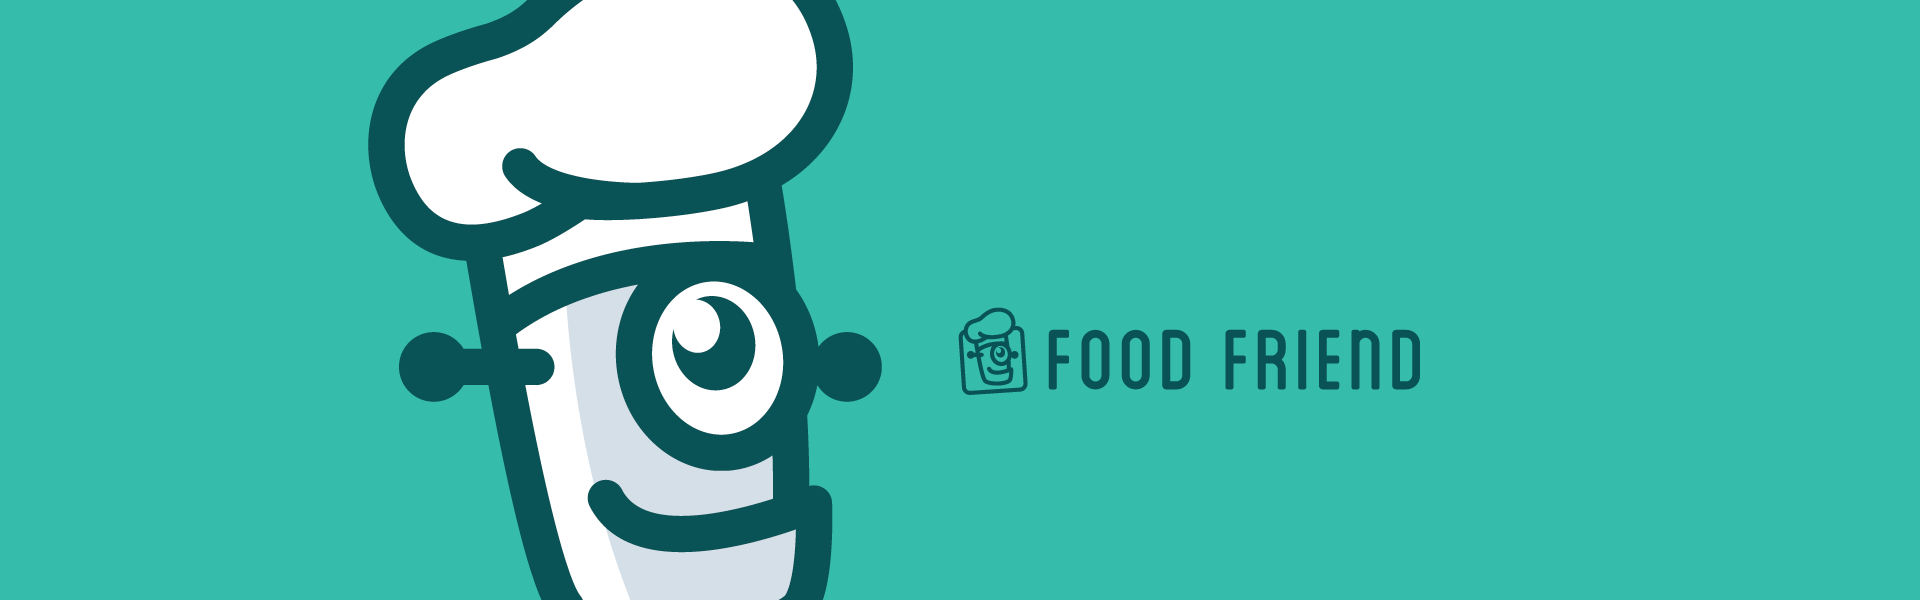 An illustration of a stylized, anthropomorphic burrito with a happy expression, arms, and one visible winking eye, accompanied by the text "Food Friend" on a green background.